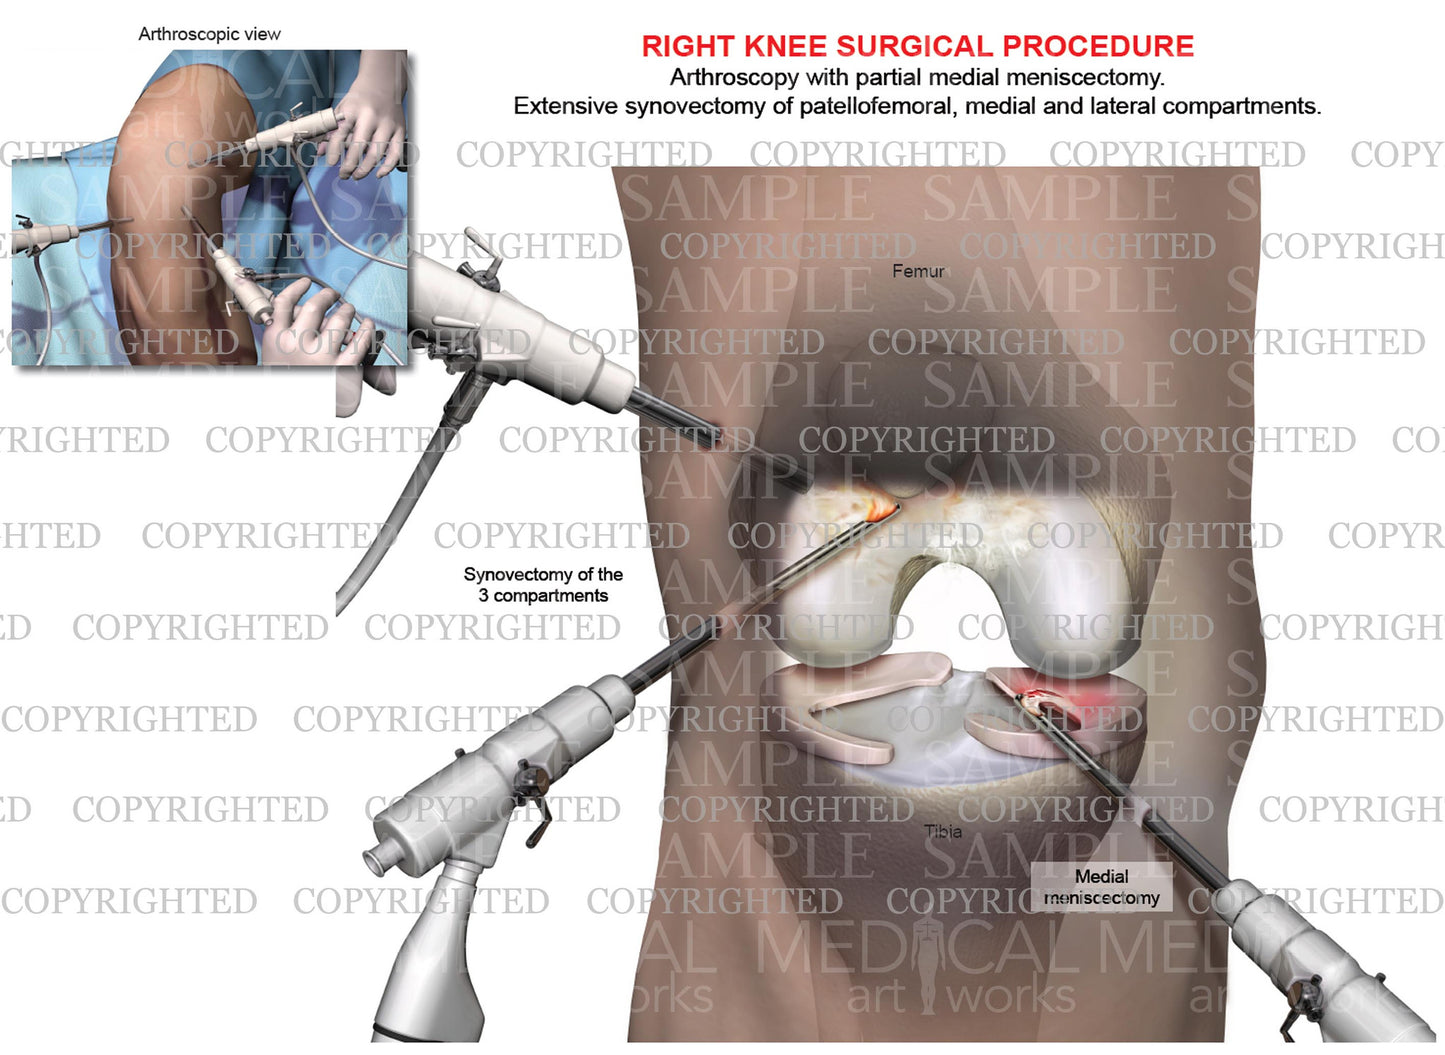 Arthroscopy of right knee with partial medial meniscectomy - synovectomy